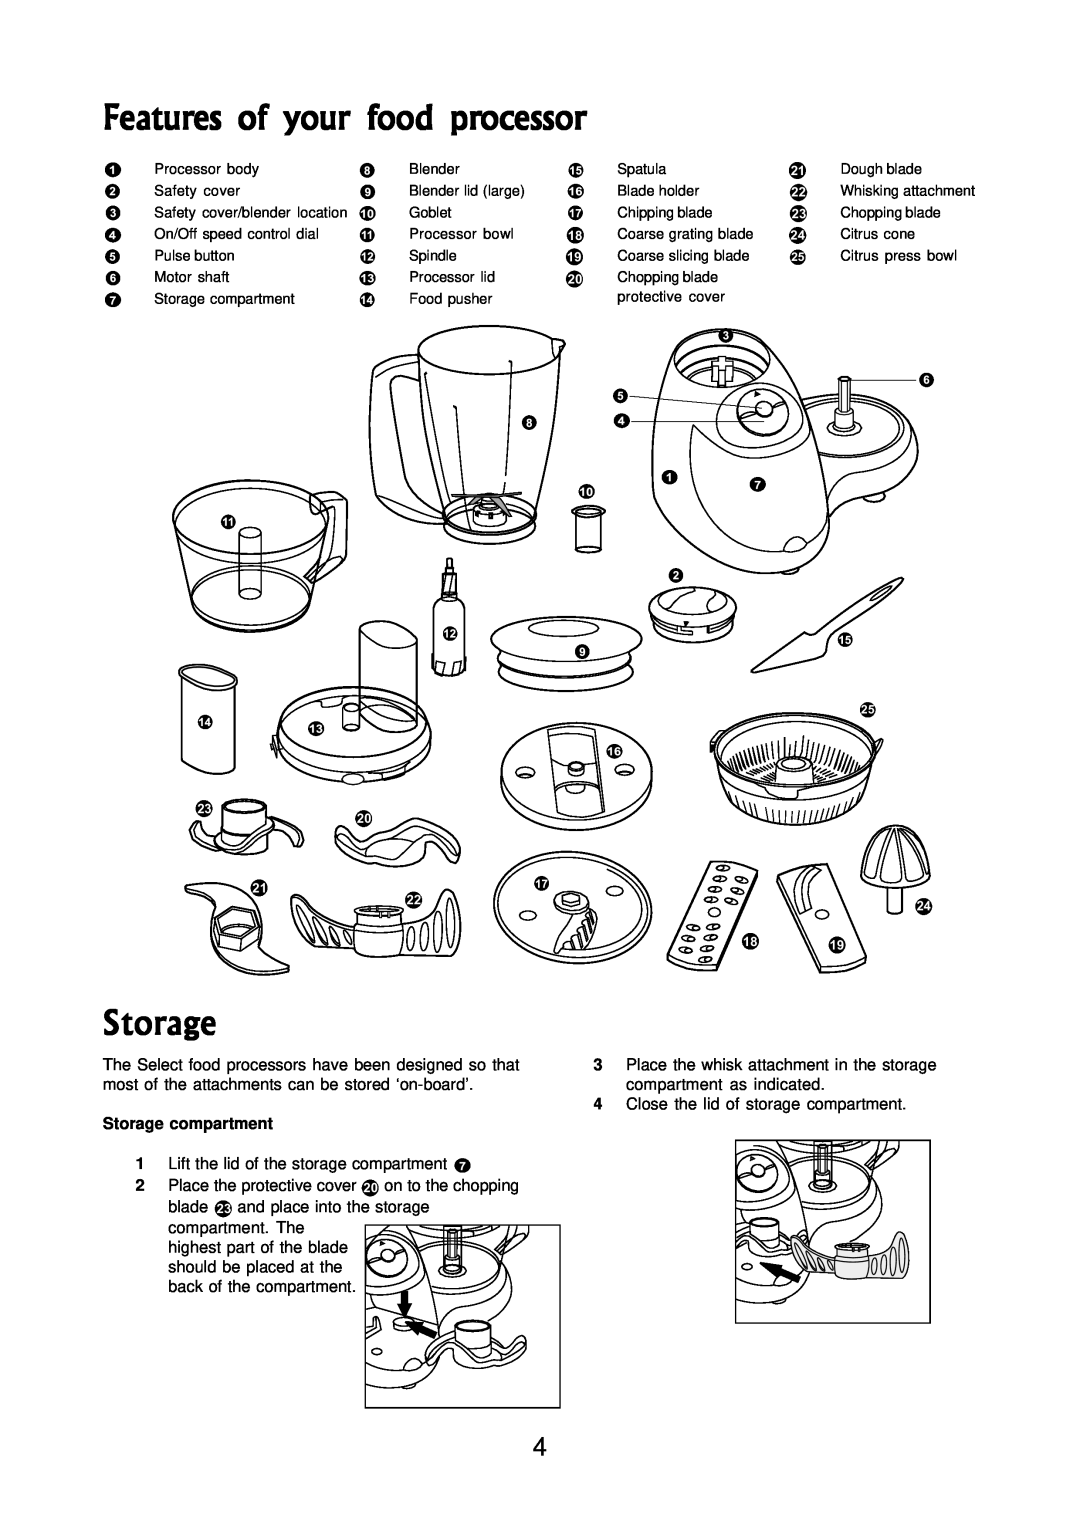 Morphy Richards 730 manual Features of your food processor, Storage compartment 